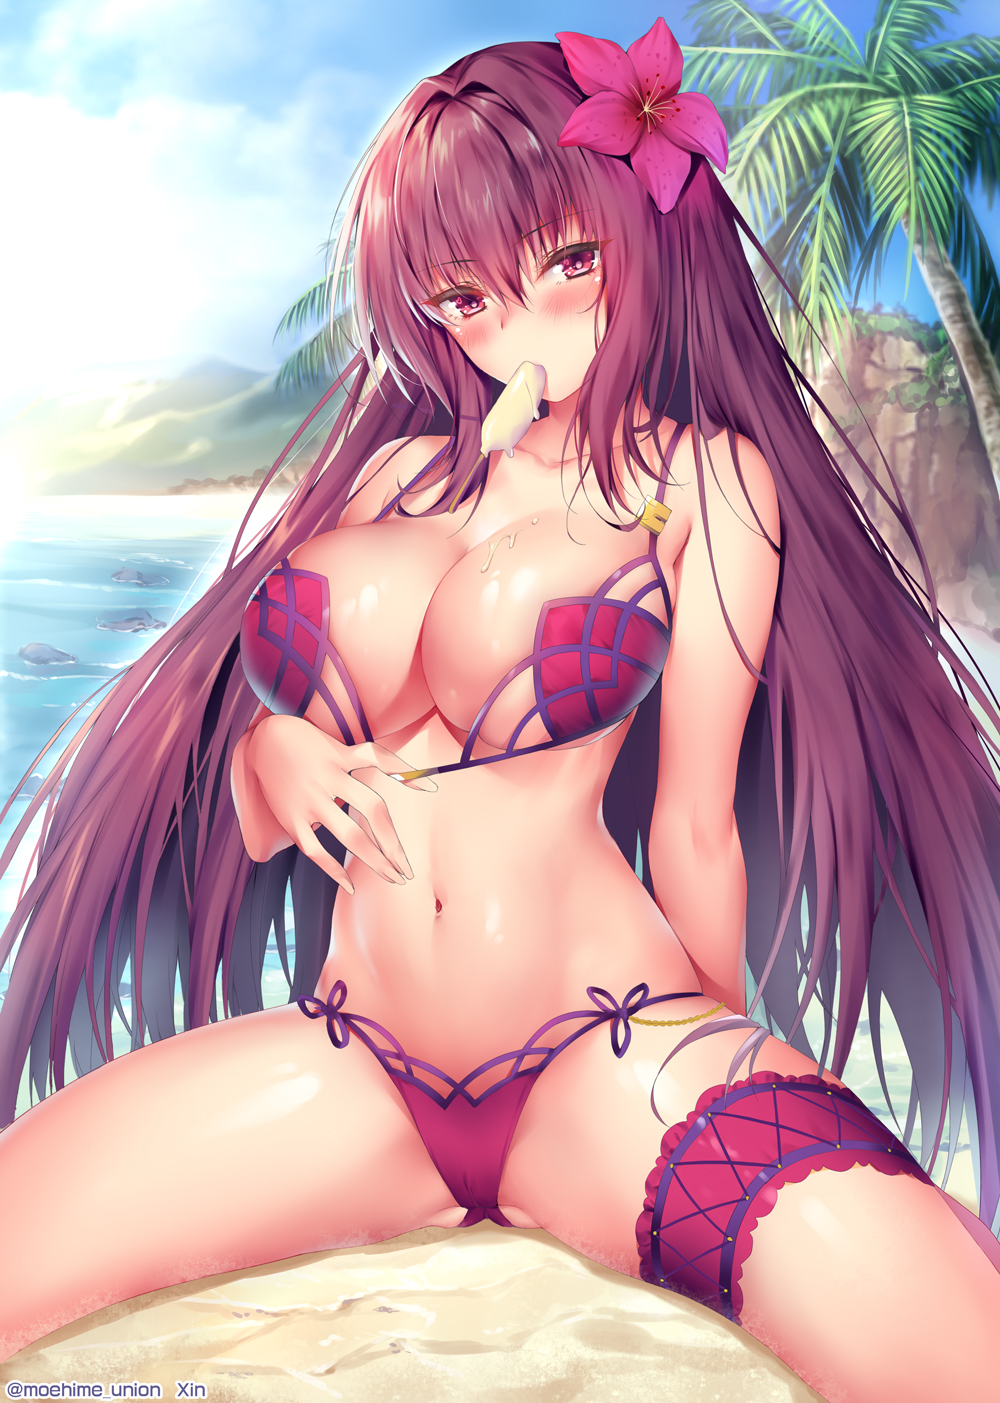 Anime 1000x1403 Fate/Grand Order Scathach anime girls spread legs big boobs boobs flower in hair long hair anime popsicle ice cream cleavage purple hair purple eyes beach Obiwan (artist) Fate series bikini cameltoe palm trees belly button looking at viewer belly